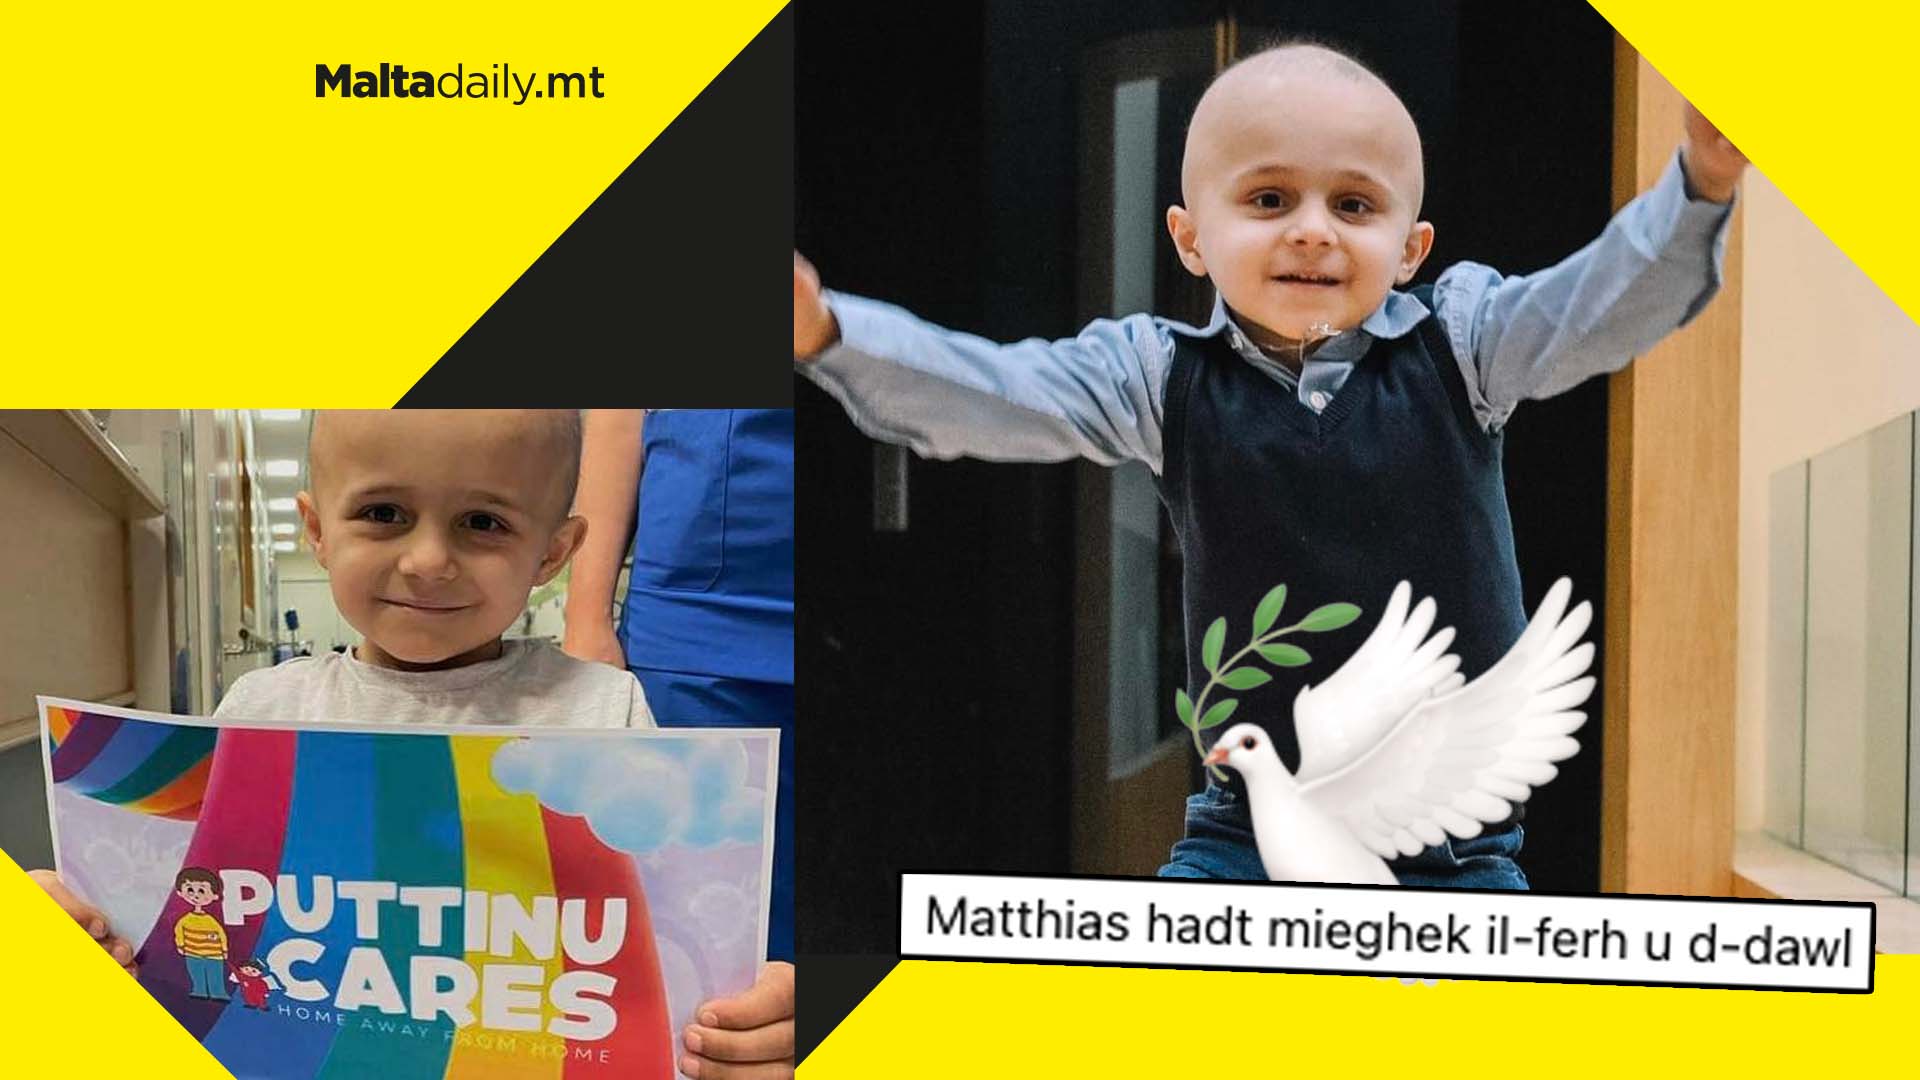 Tributes pour in for late 5-year-old Puttinu patient Matthias